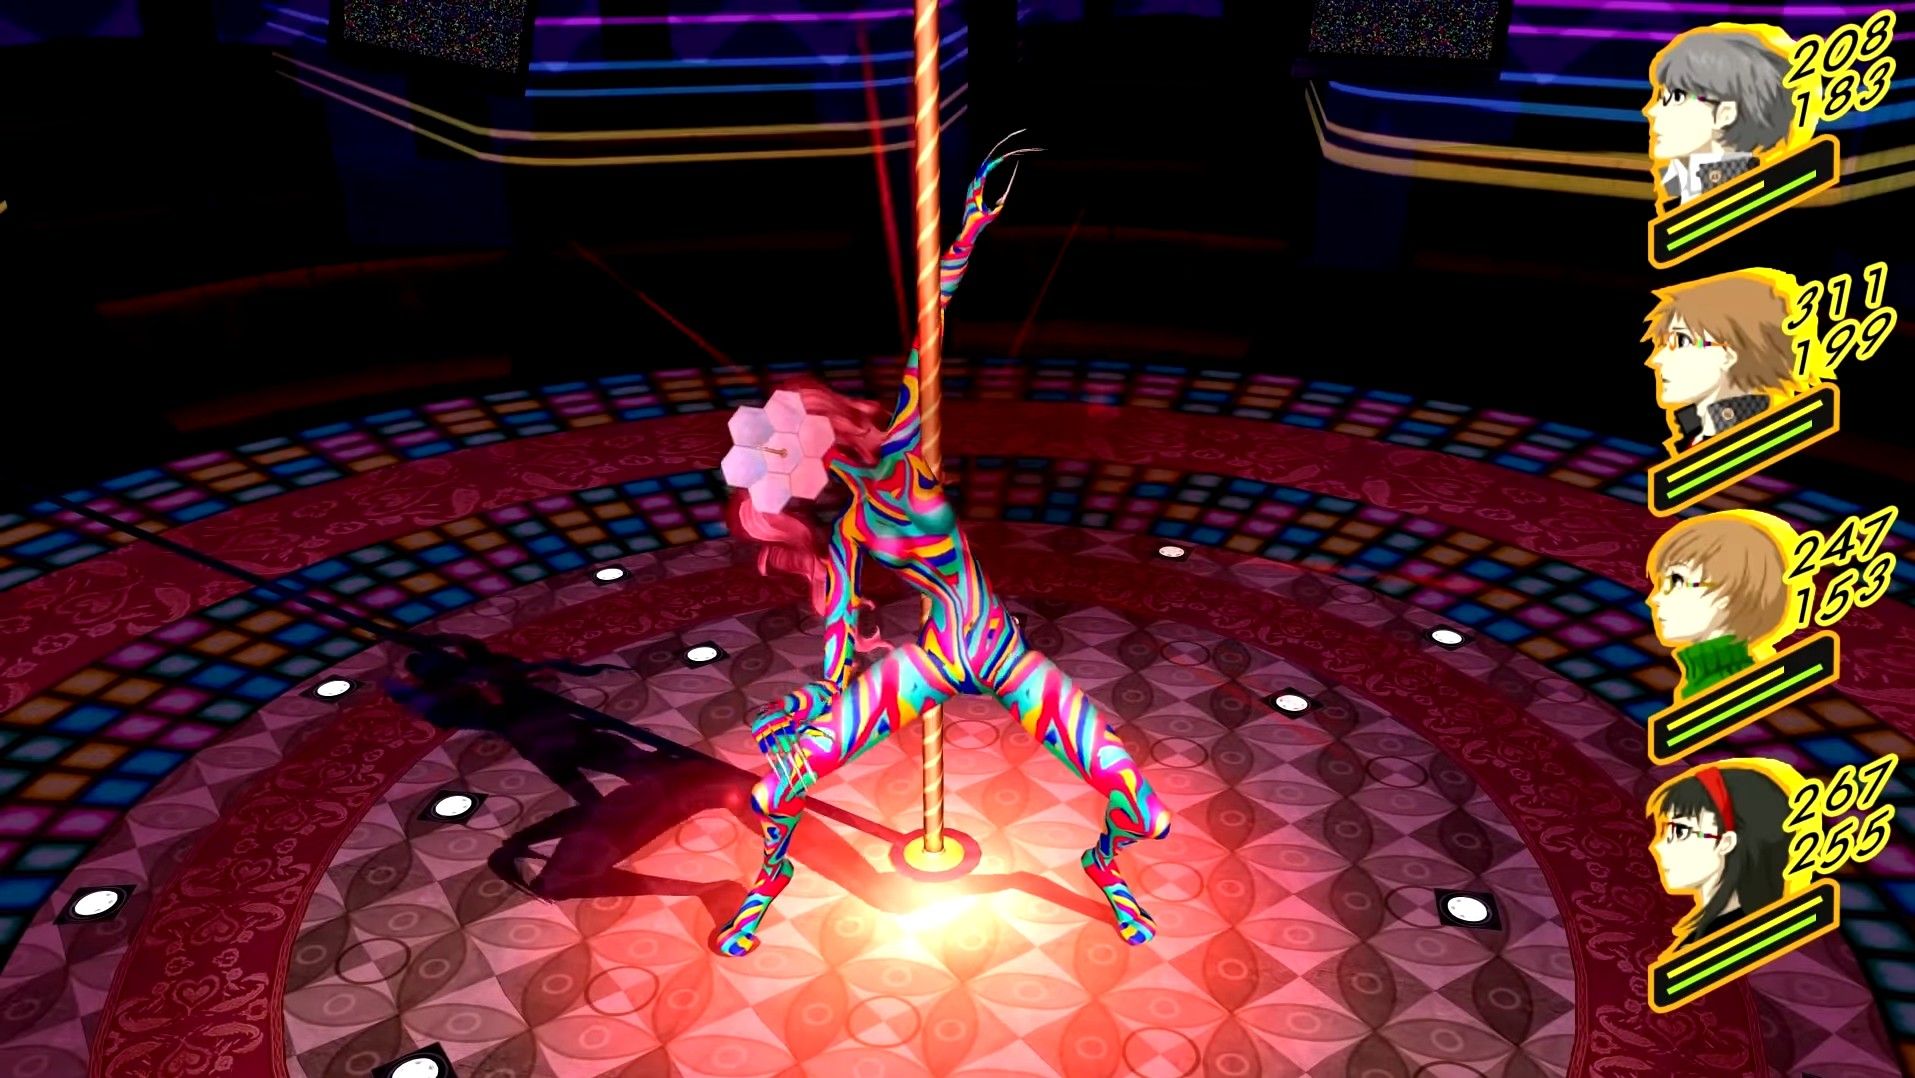 rise's shadow during the boss fight dancing seductively in persona 4 golden